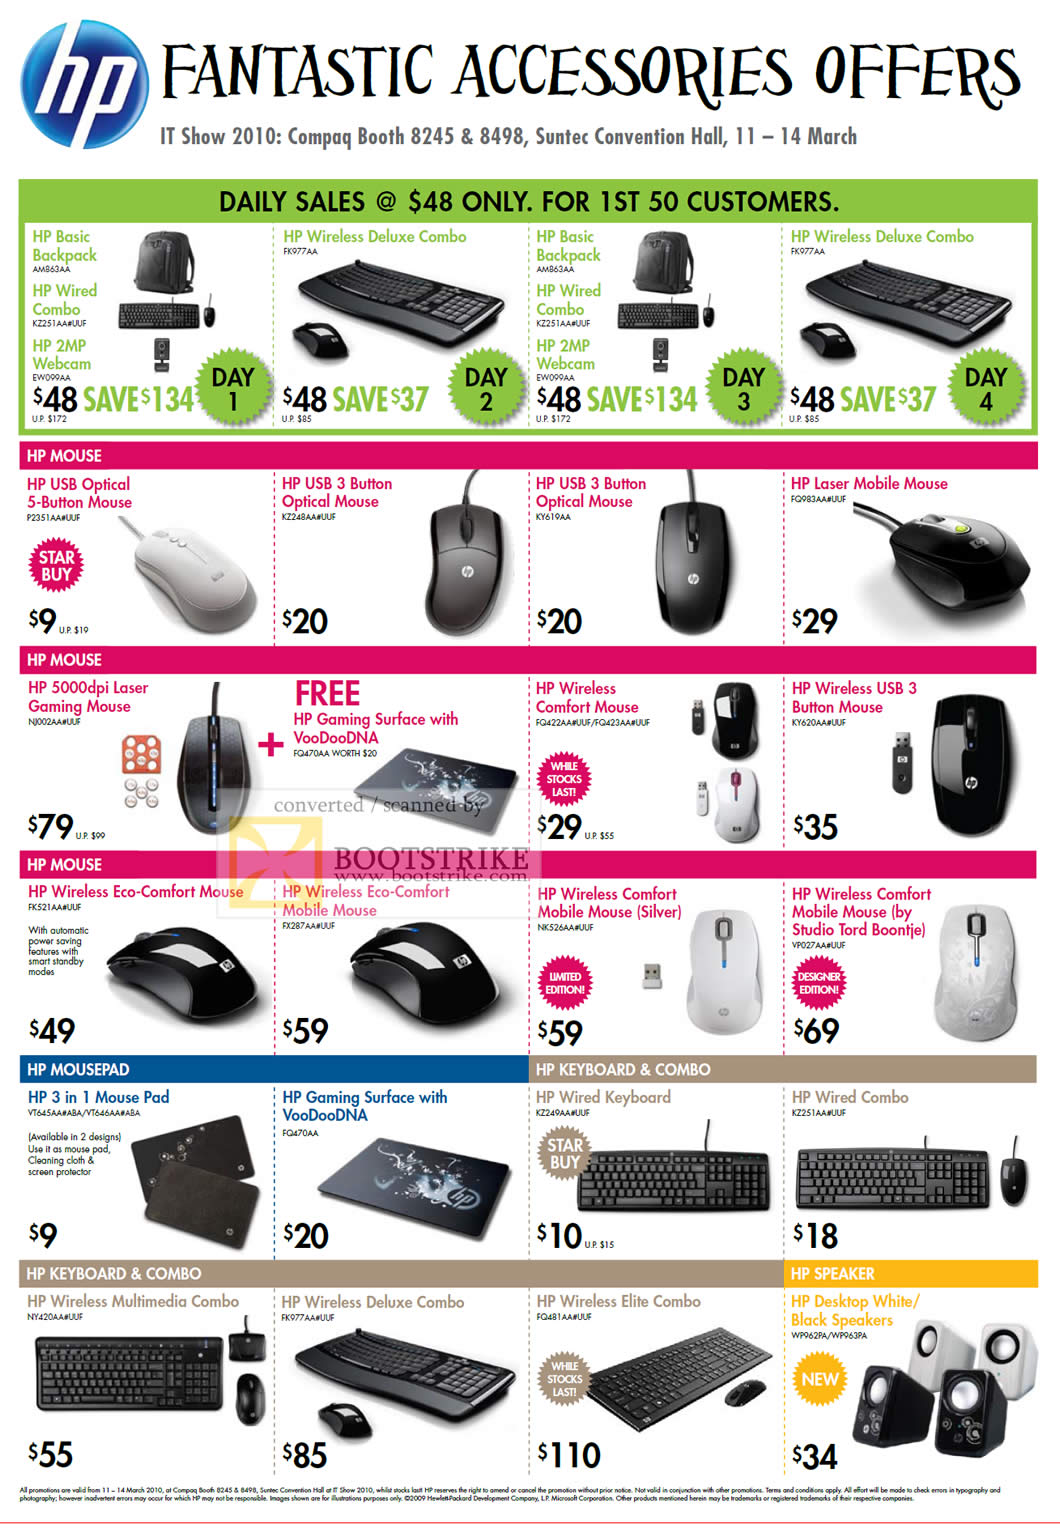 IT Show 2010 price list image brochure of HP Accessories Daily Sales Mouse Mousepad Keyboard Combo Speakers Webcam